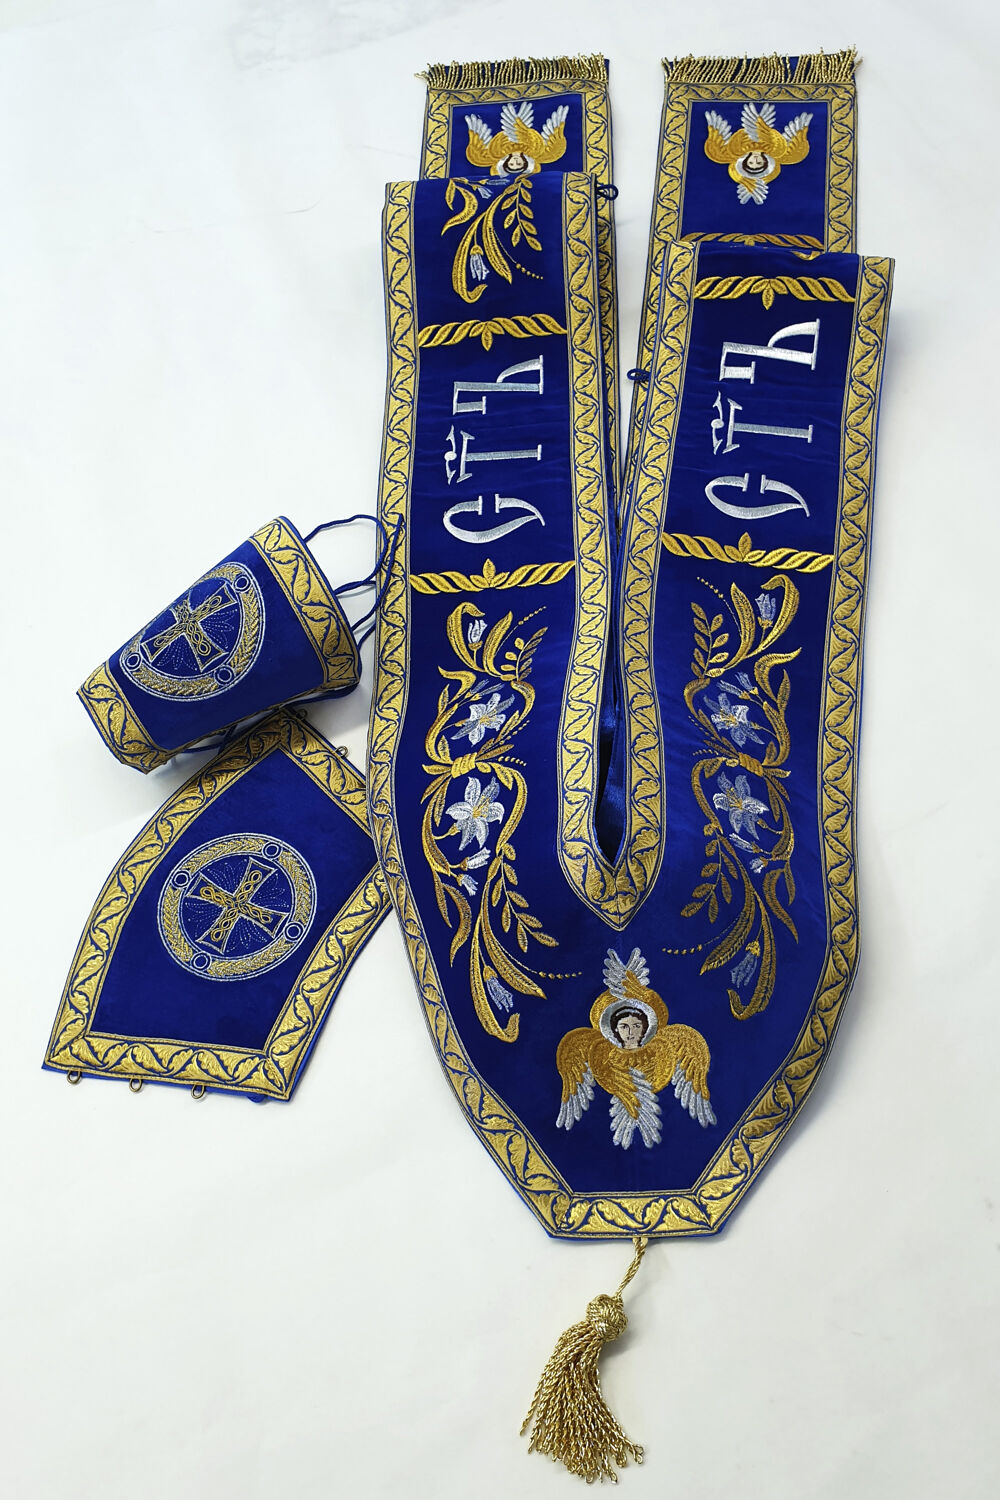 Embroidered double orarion for deacon's vestments